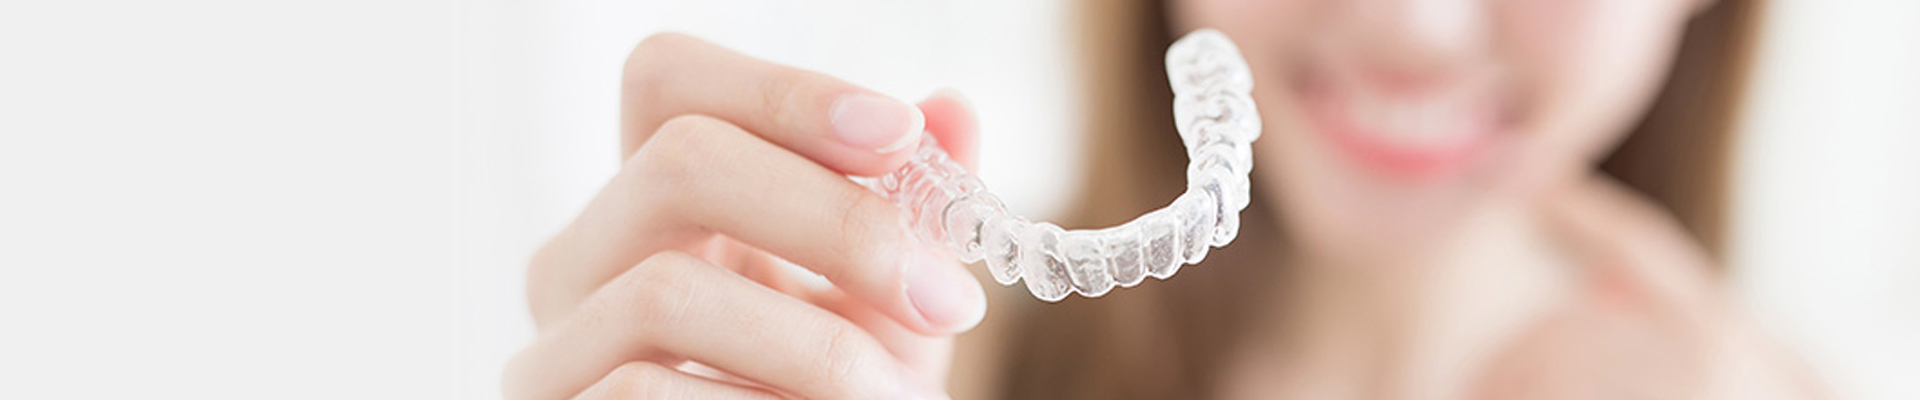 orthodontic-types-and-prices-of-braces